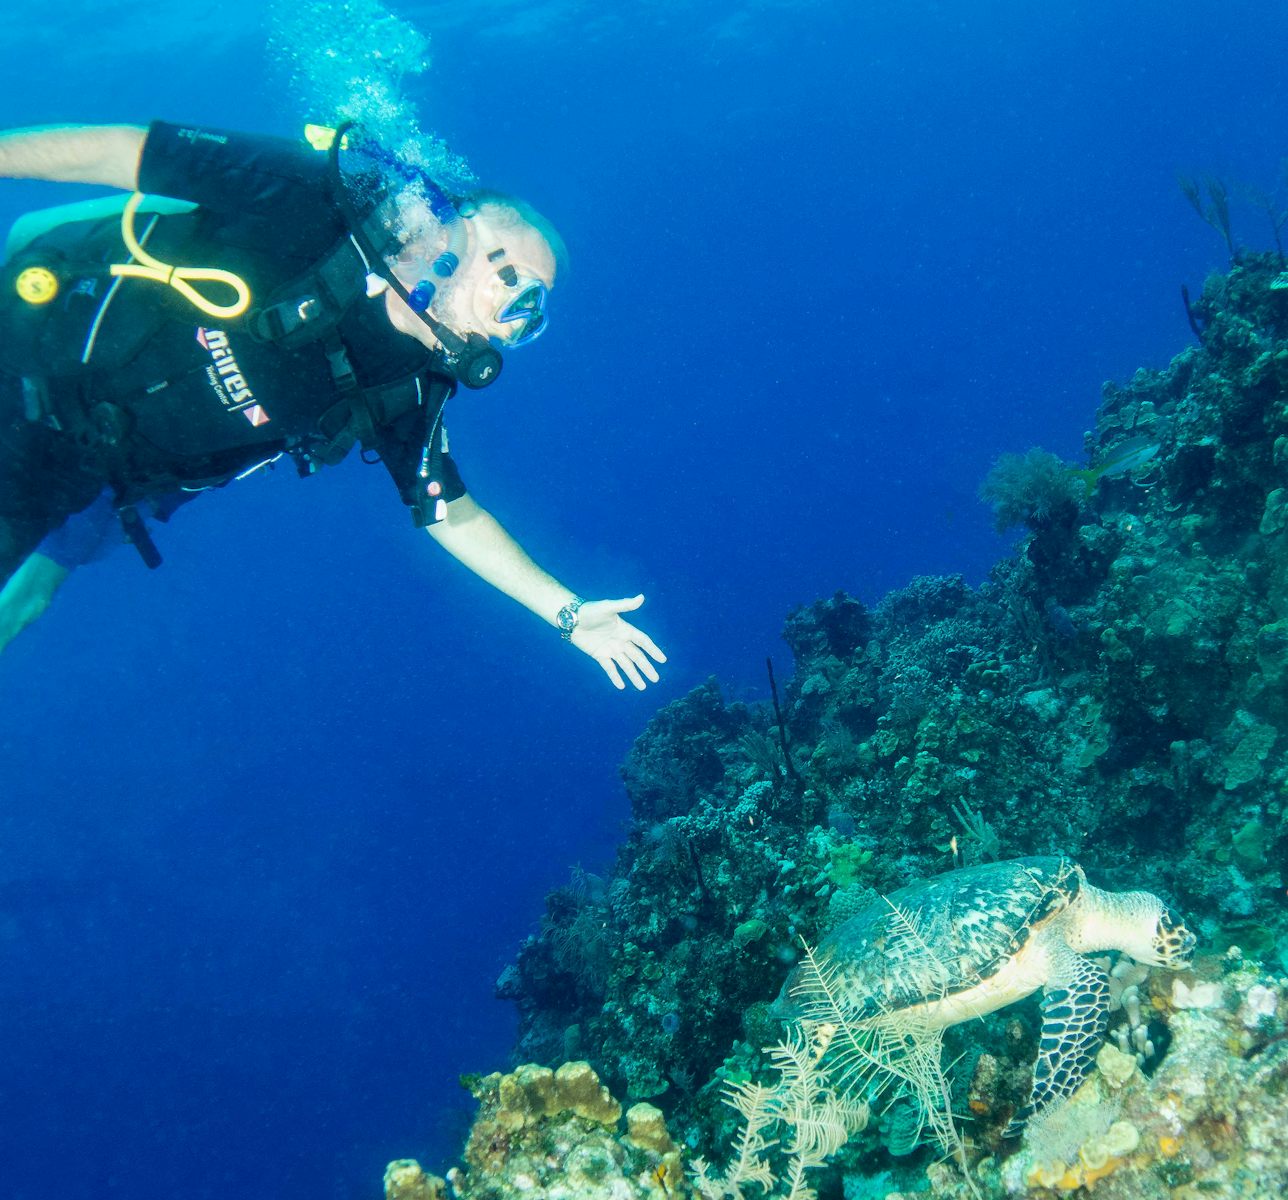 Scuba Diving in Roatan~ Turtle seemed very accustomed to divers. It was int